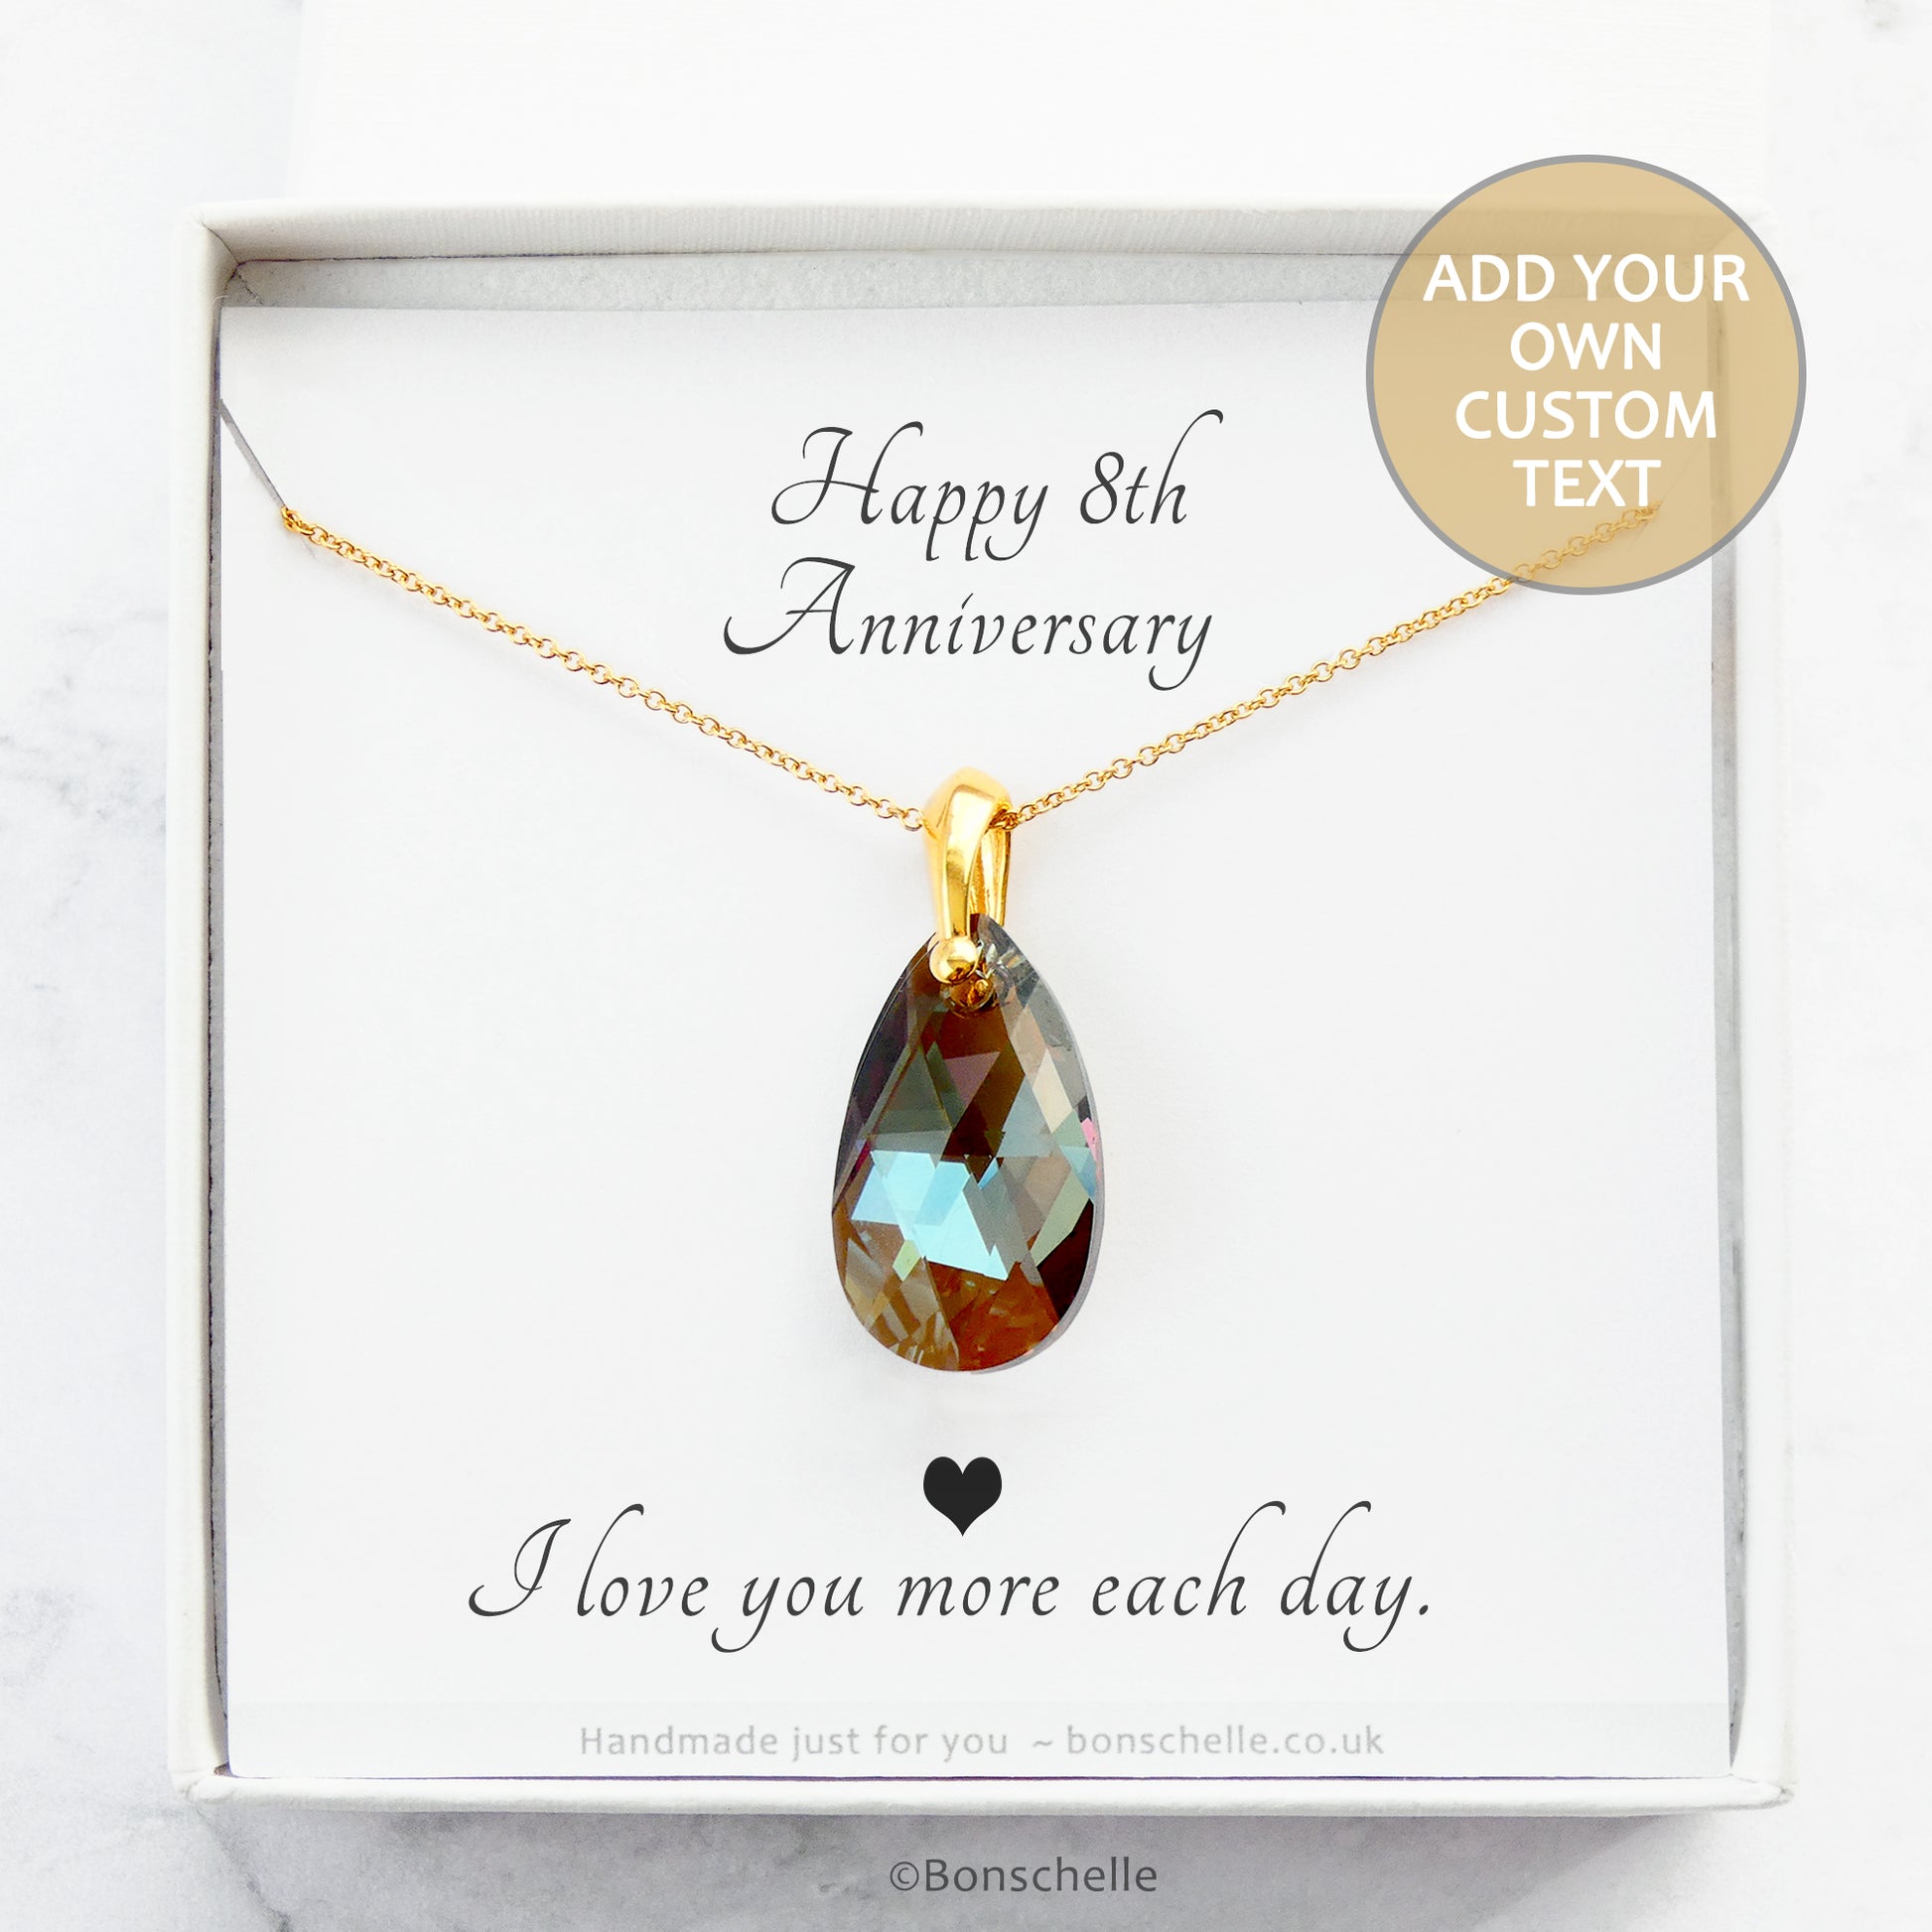 Handmade necklace with a bronze toned teardrop shape faceted crystal bead and 14K gold filled chain for womenin a gift box with a personalised message card inside.